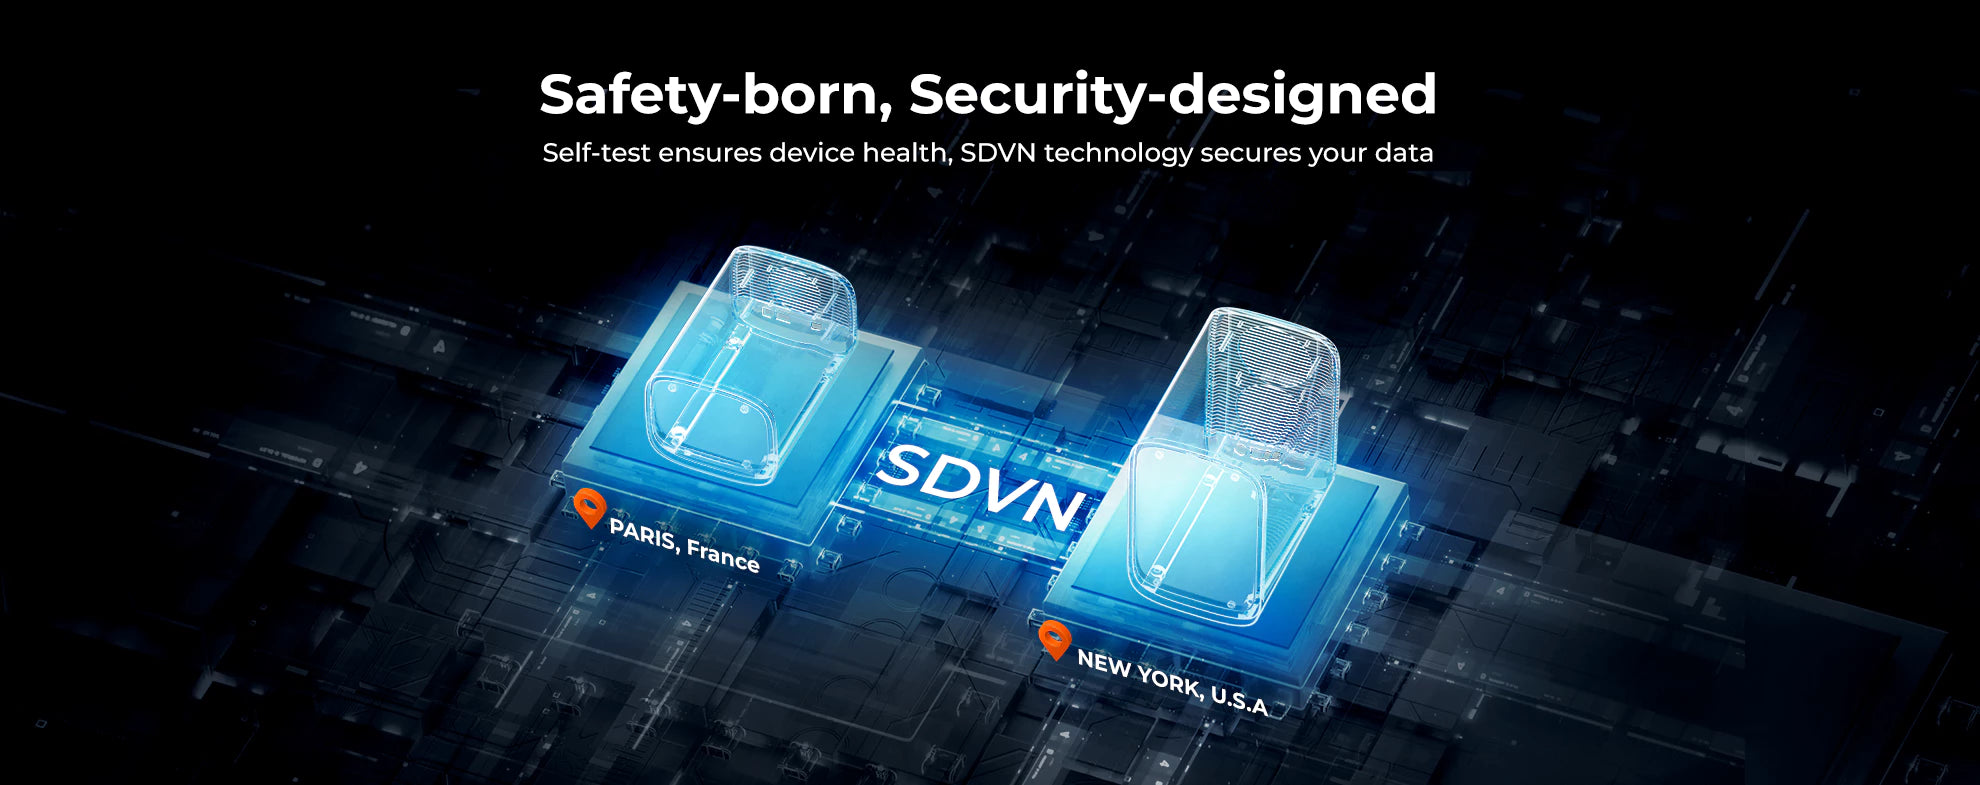 SDVN technology secures your data